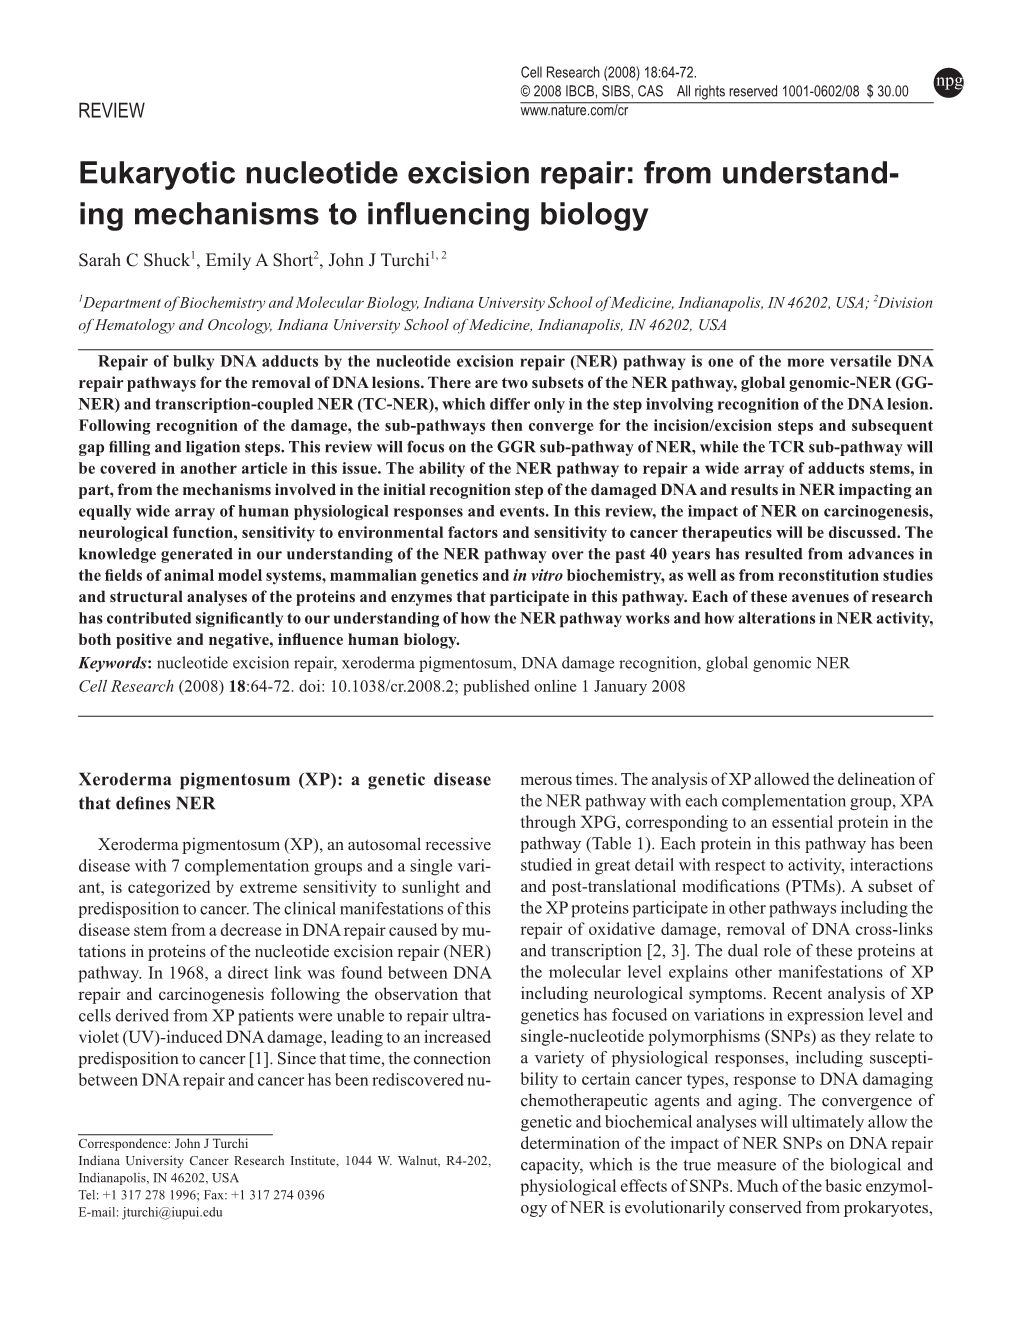 Eukaryotic Nucleotide Excision Repair: from Understand- Ing Mechanisms to Influencing Biology Sarah C Shuck1, Emily a Short2, John J Turchi1, 2